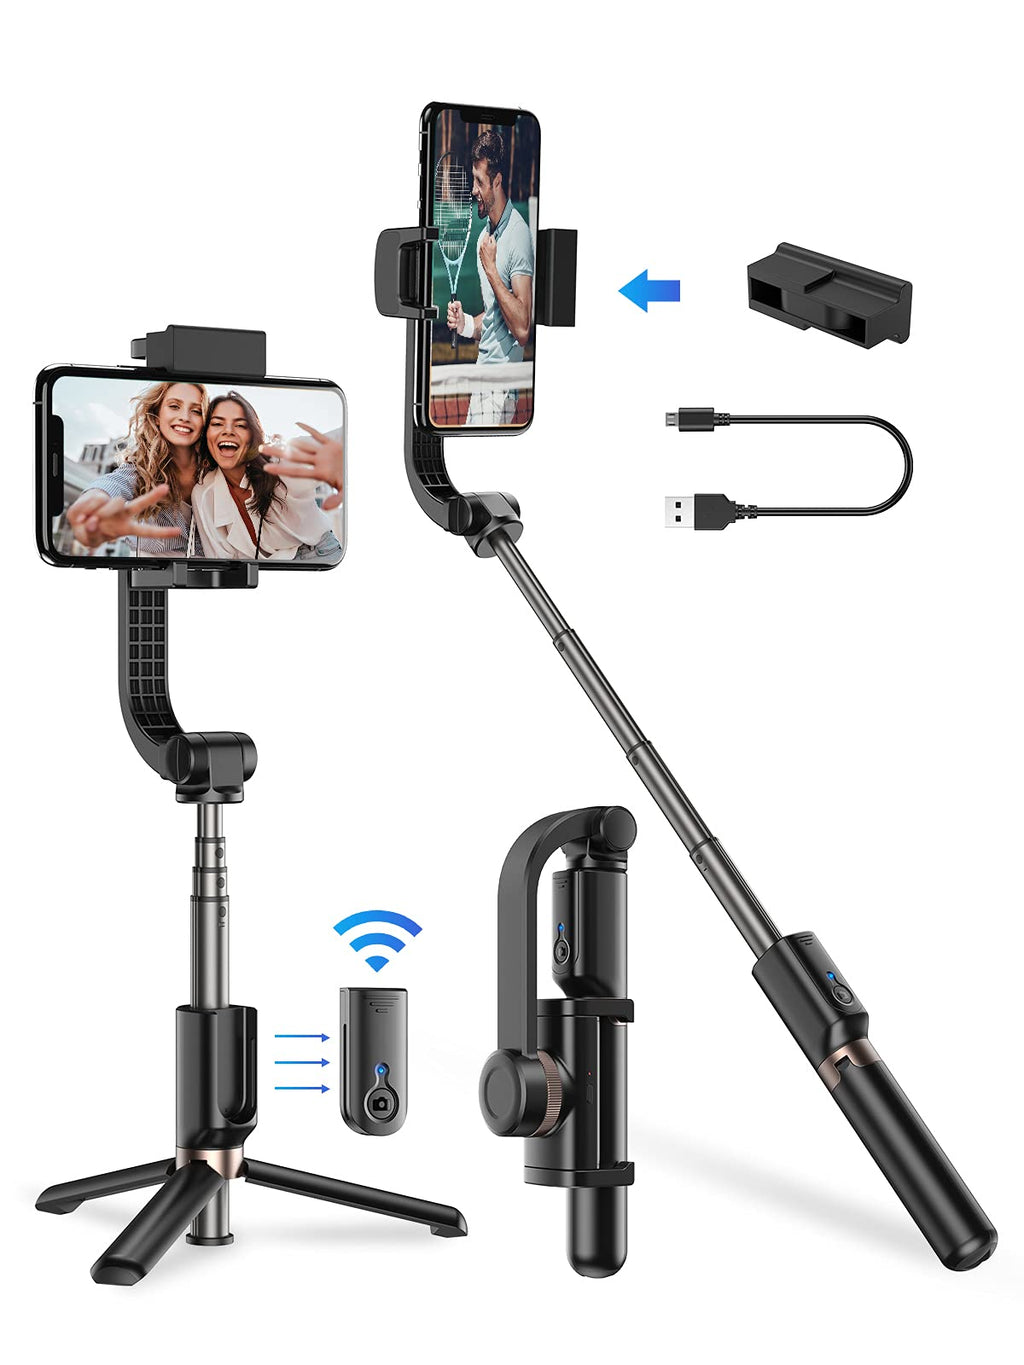  [AUSTRALIA] - Gimbal Stabilizer For Smartphone, APEXEL 360° Rotation Auto Balance Small Portable Handhold Selfie Stick Tripod With Wireless Remote, 1-Axis Lightweight Extendable Stabilizer Gimble Iphone Phone Gopro